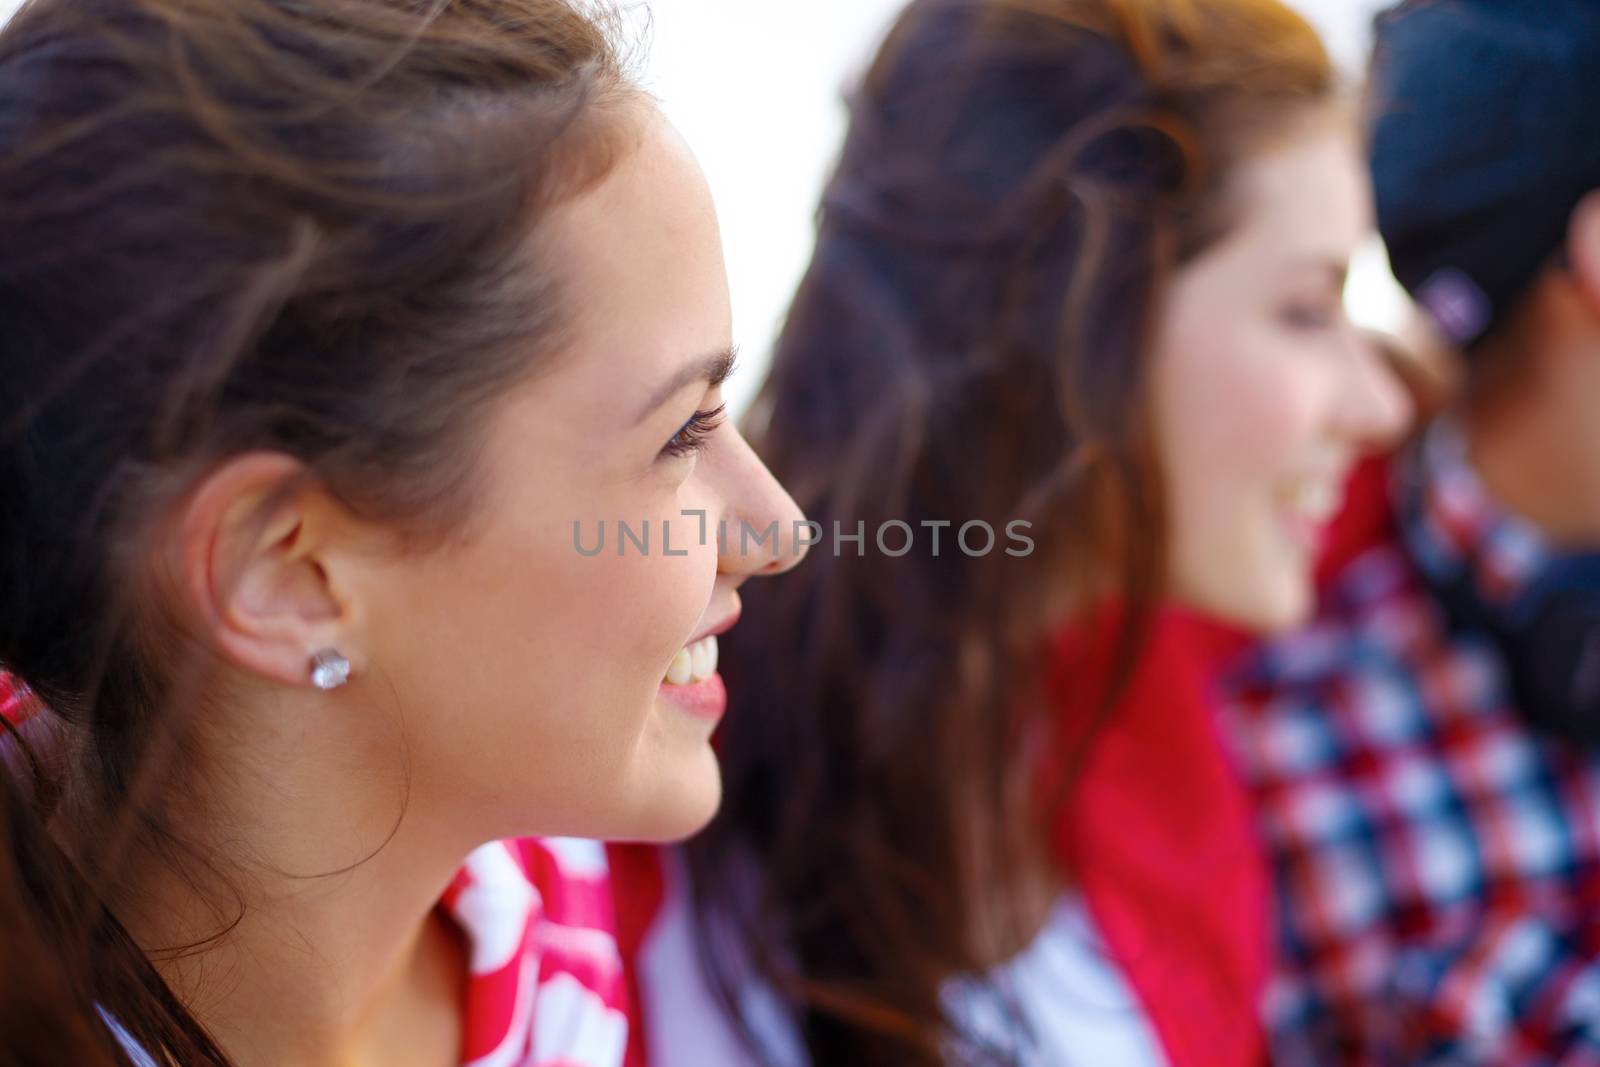 summer holidays, people and happiness concept - smiling teenage girl outdoors with friends